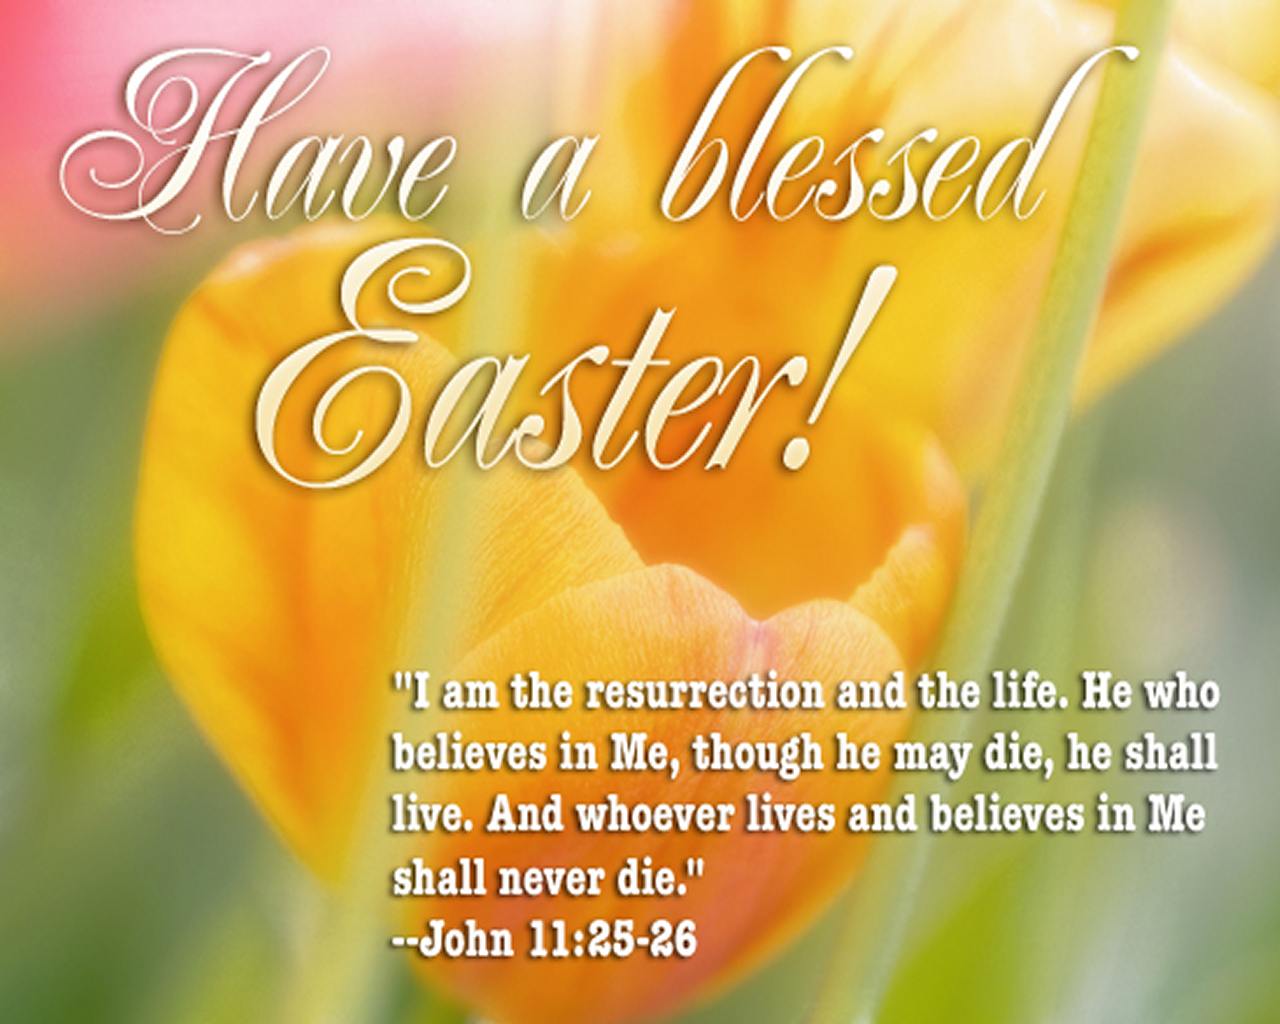 25 Inspiring Easter Quotes From The Bible - Bible Verse Happy Easter - HD Wallpaper 